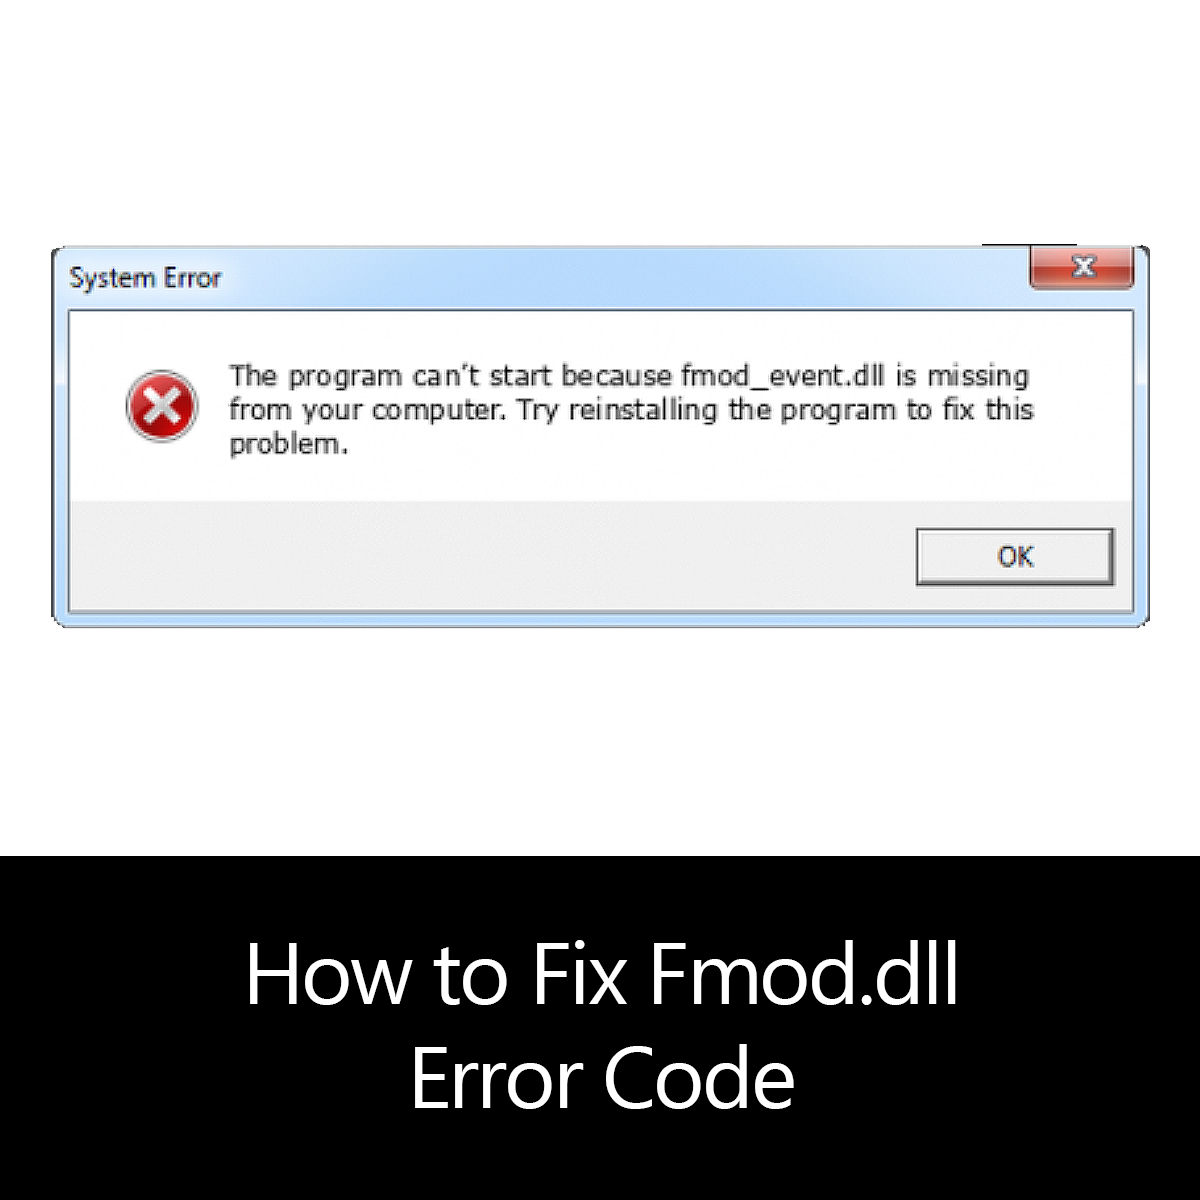 fmod.dll is missing scp